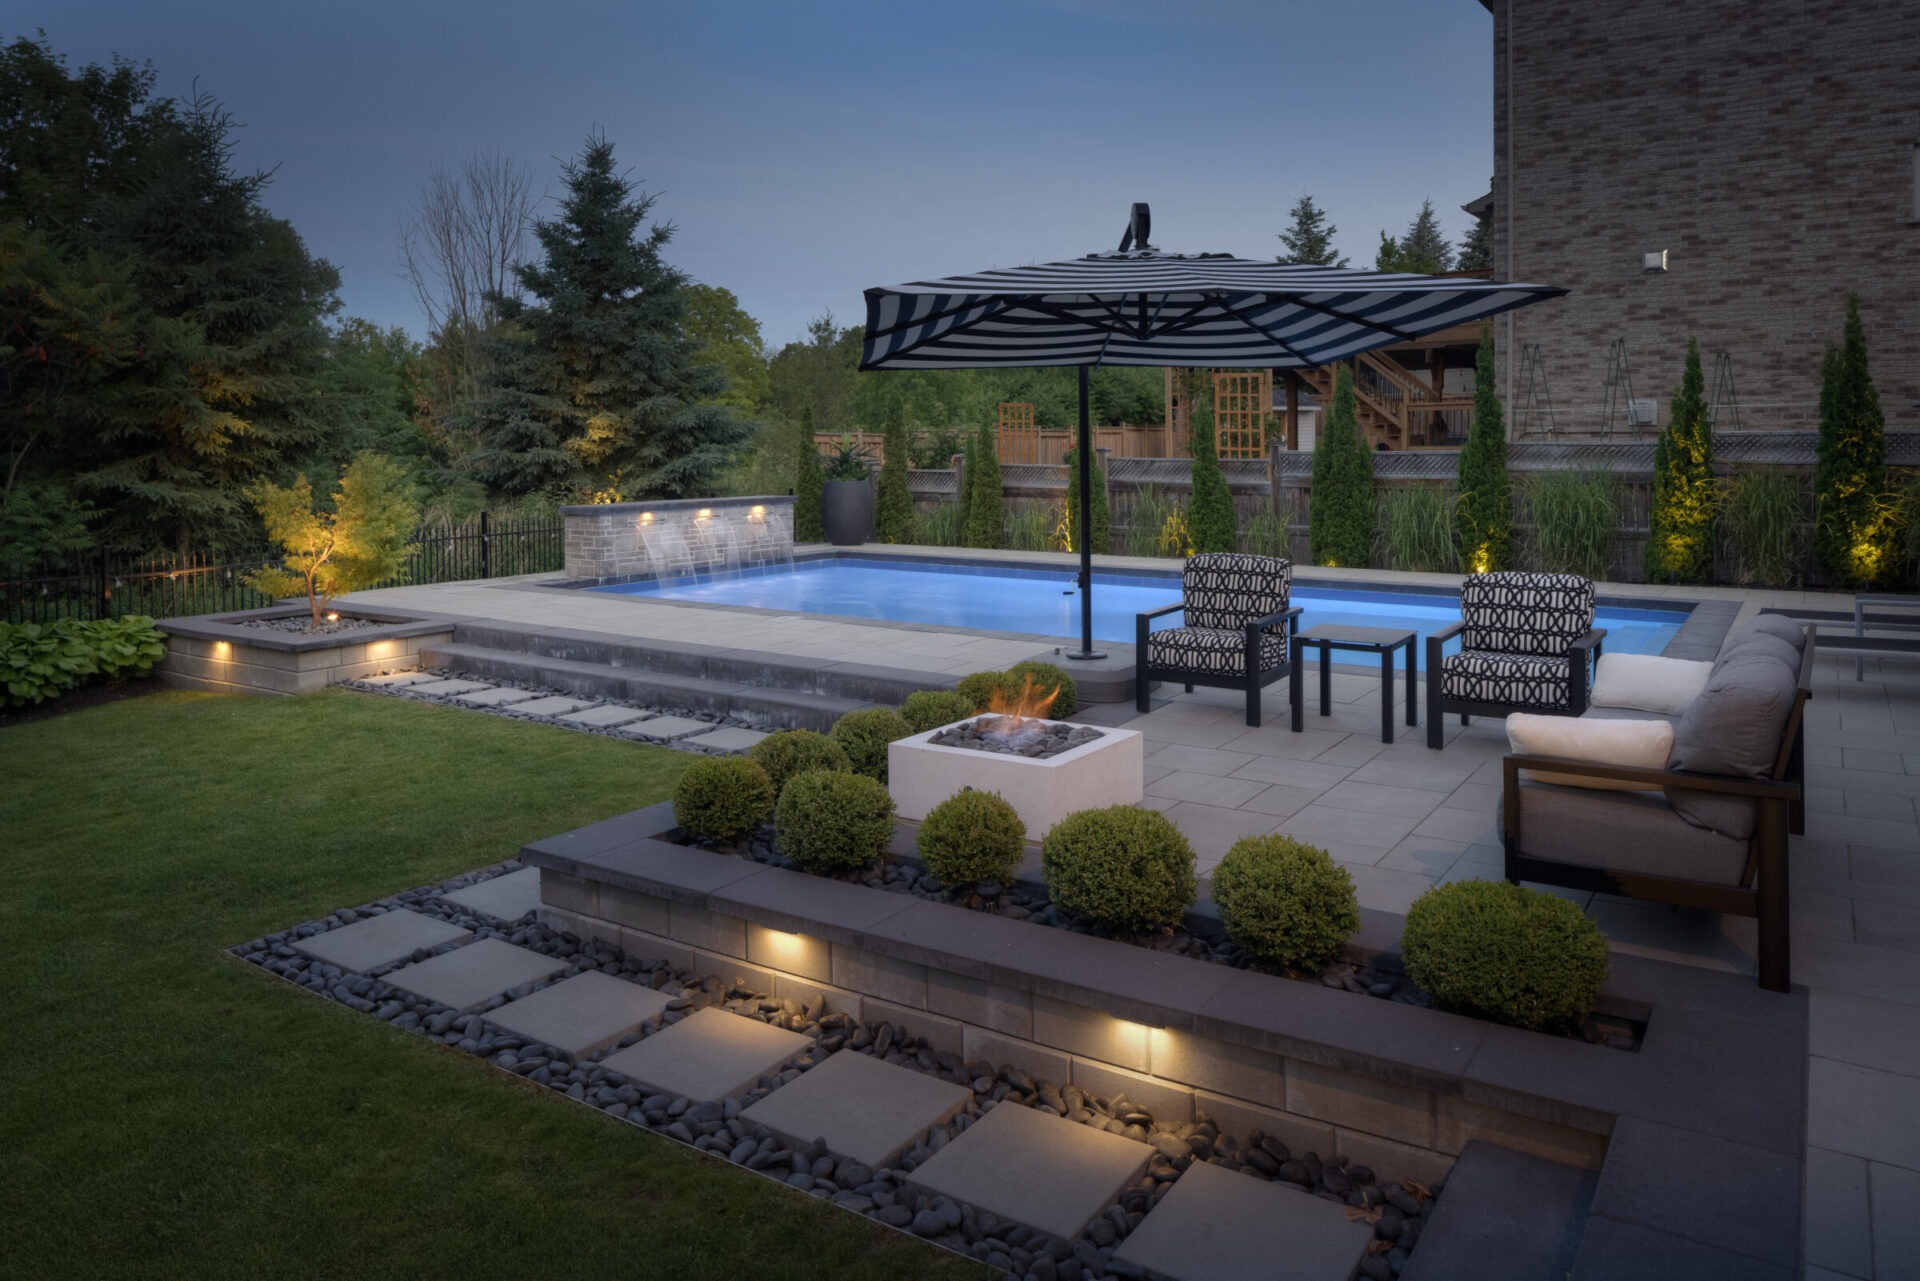 An elegant outdoor space at dusk featuring a swimming pool, patio with furniture, a fire pit, ambient lighting, and landscaped garden areas.